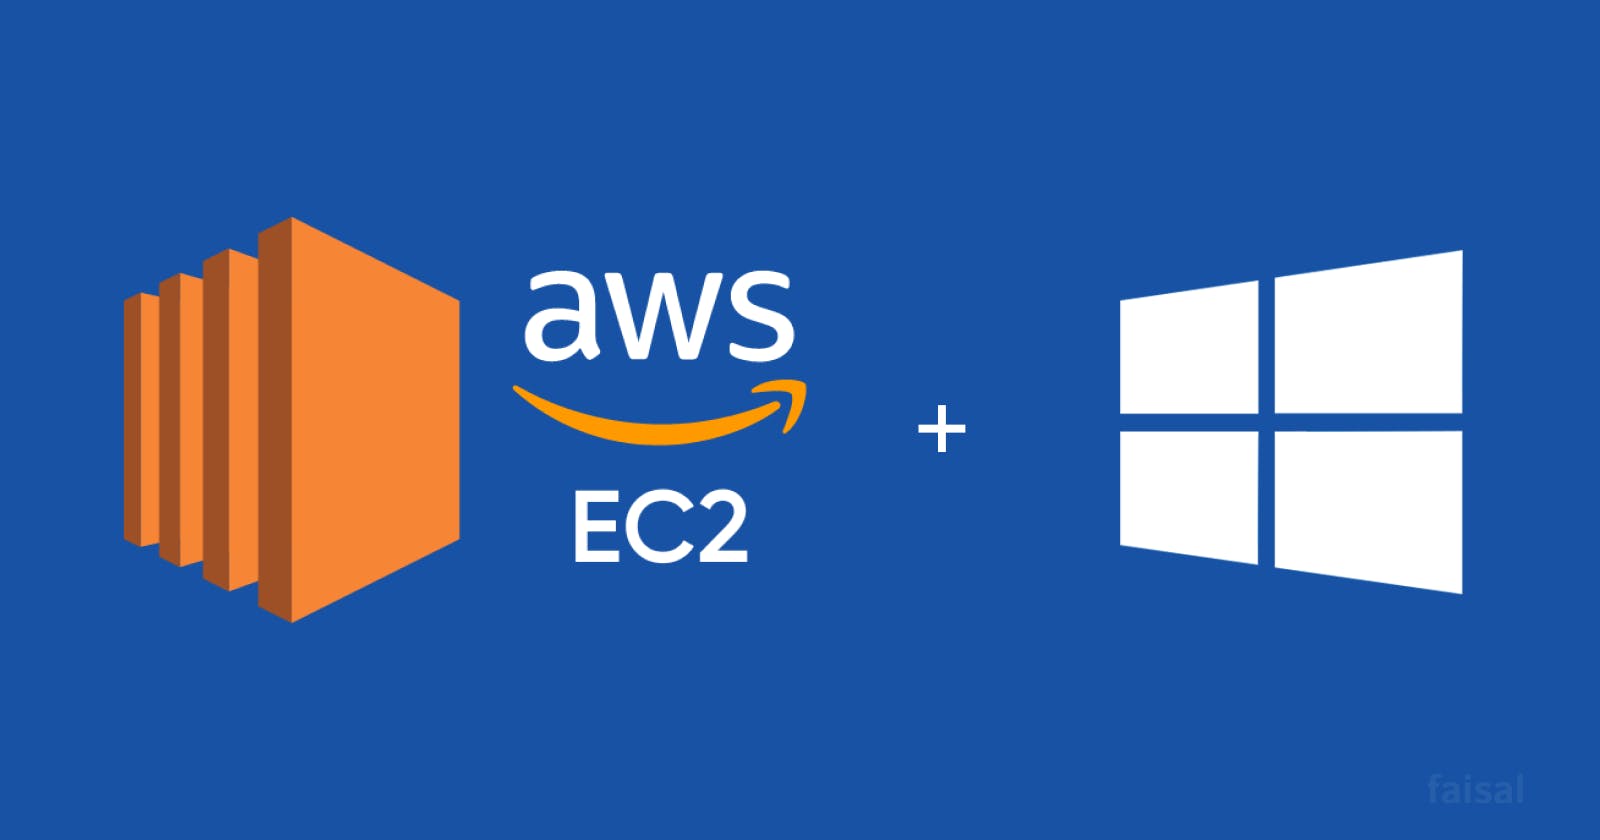 How to Set Up a Windows EC2 Instance on AWS